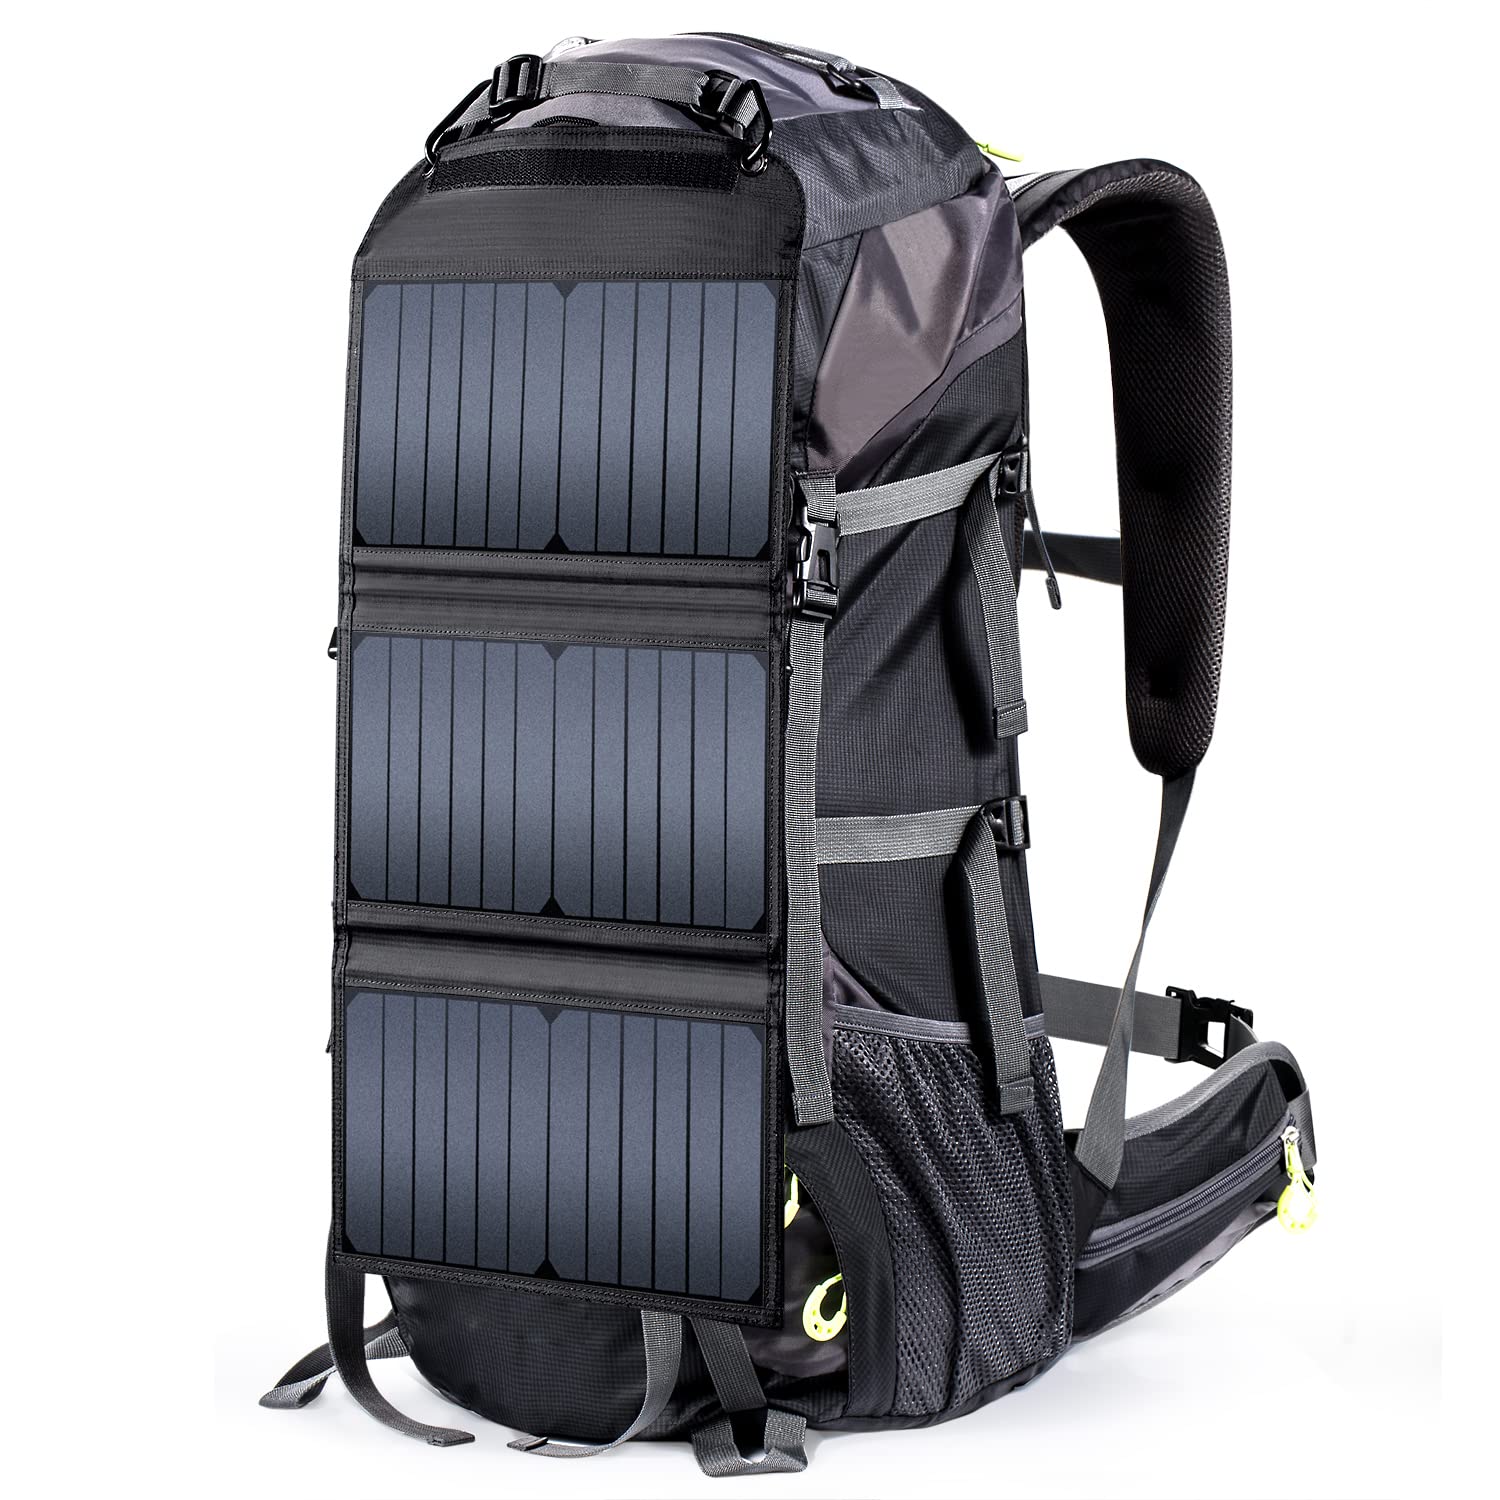 ECEEN Hiking Solar Backpack is a wonderful option